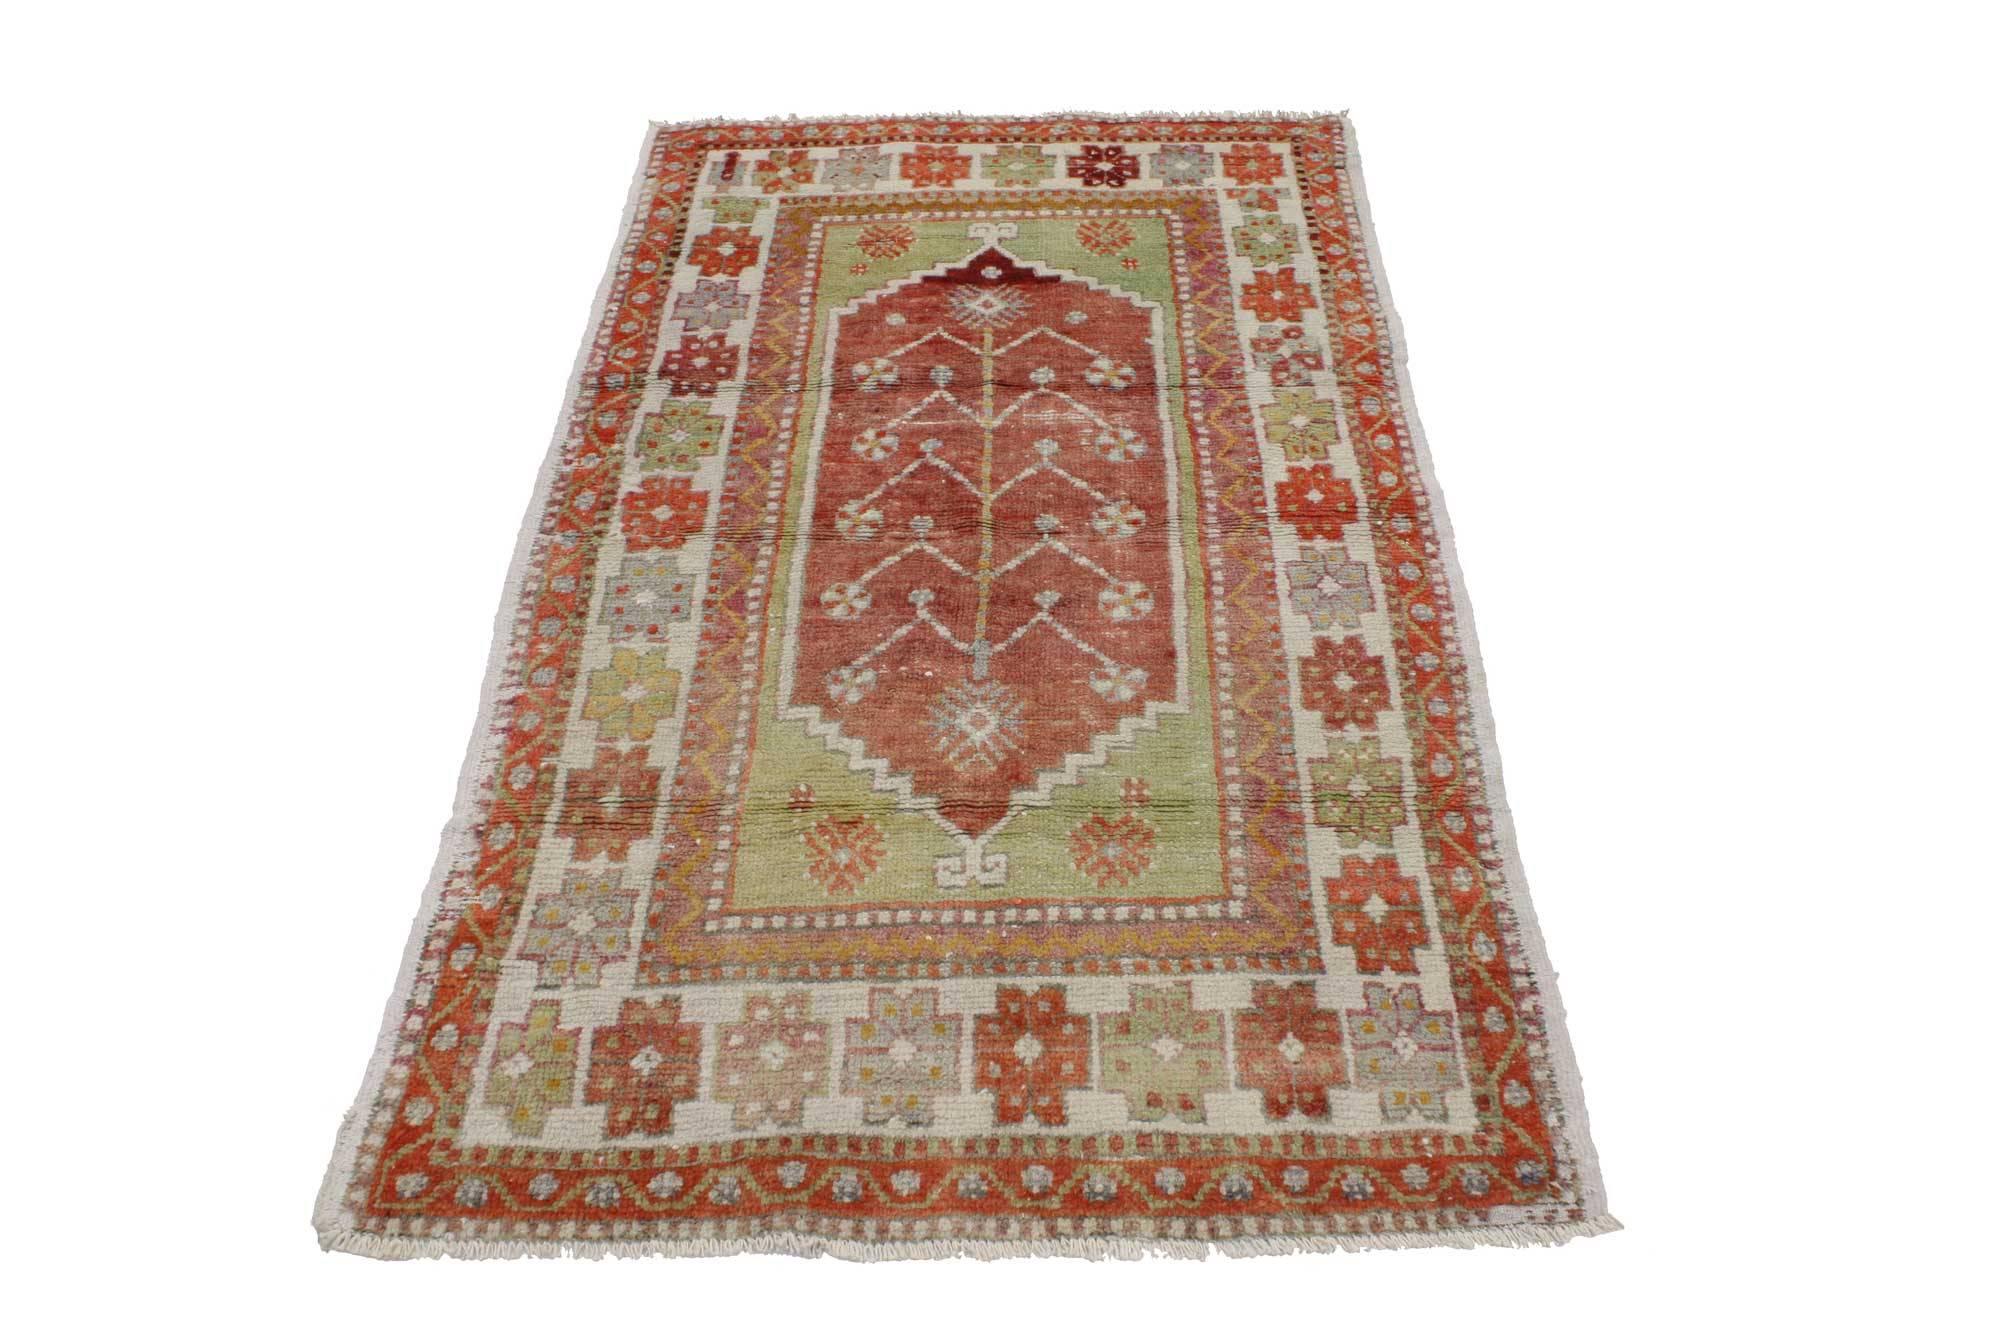 51775, vintage Turkish Oushak rug, colorful rug for kitchen, bath, foyer or entryway. This hand-knotted wool vintage Turkish Oushak rug features a modern traditional style. Immersed in Anatolian history and refined colors, this vintage Oushak rug